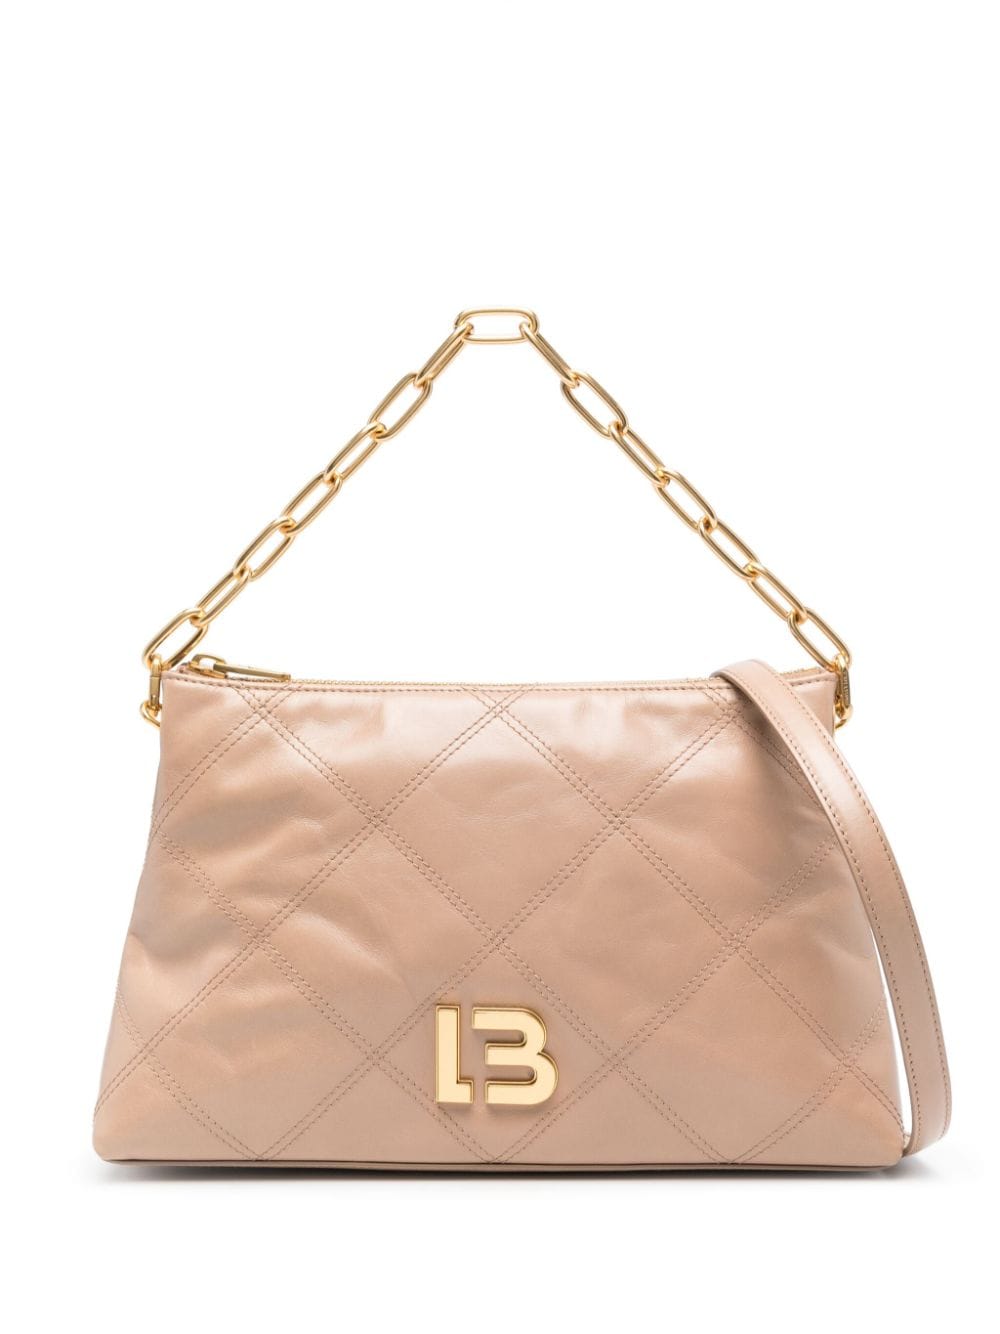 Bimba y Lola quilted leather tote bag - Brown von Bimba y Lola